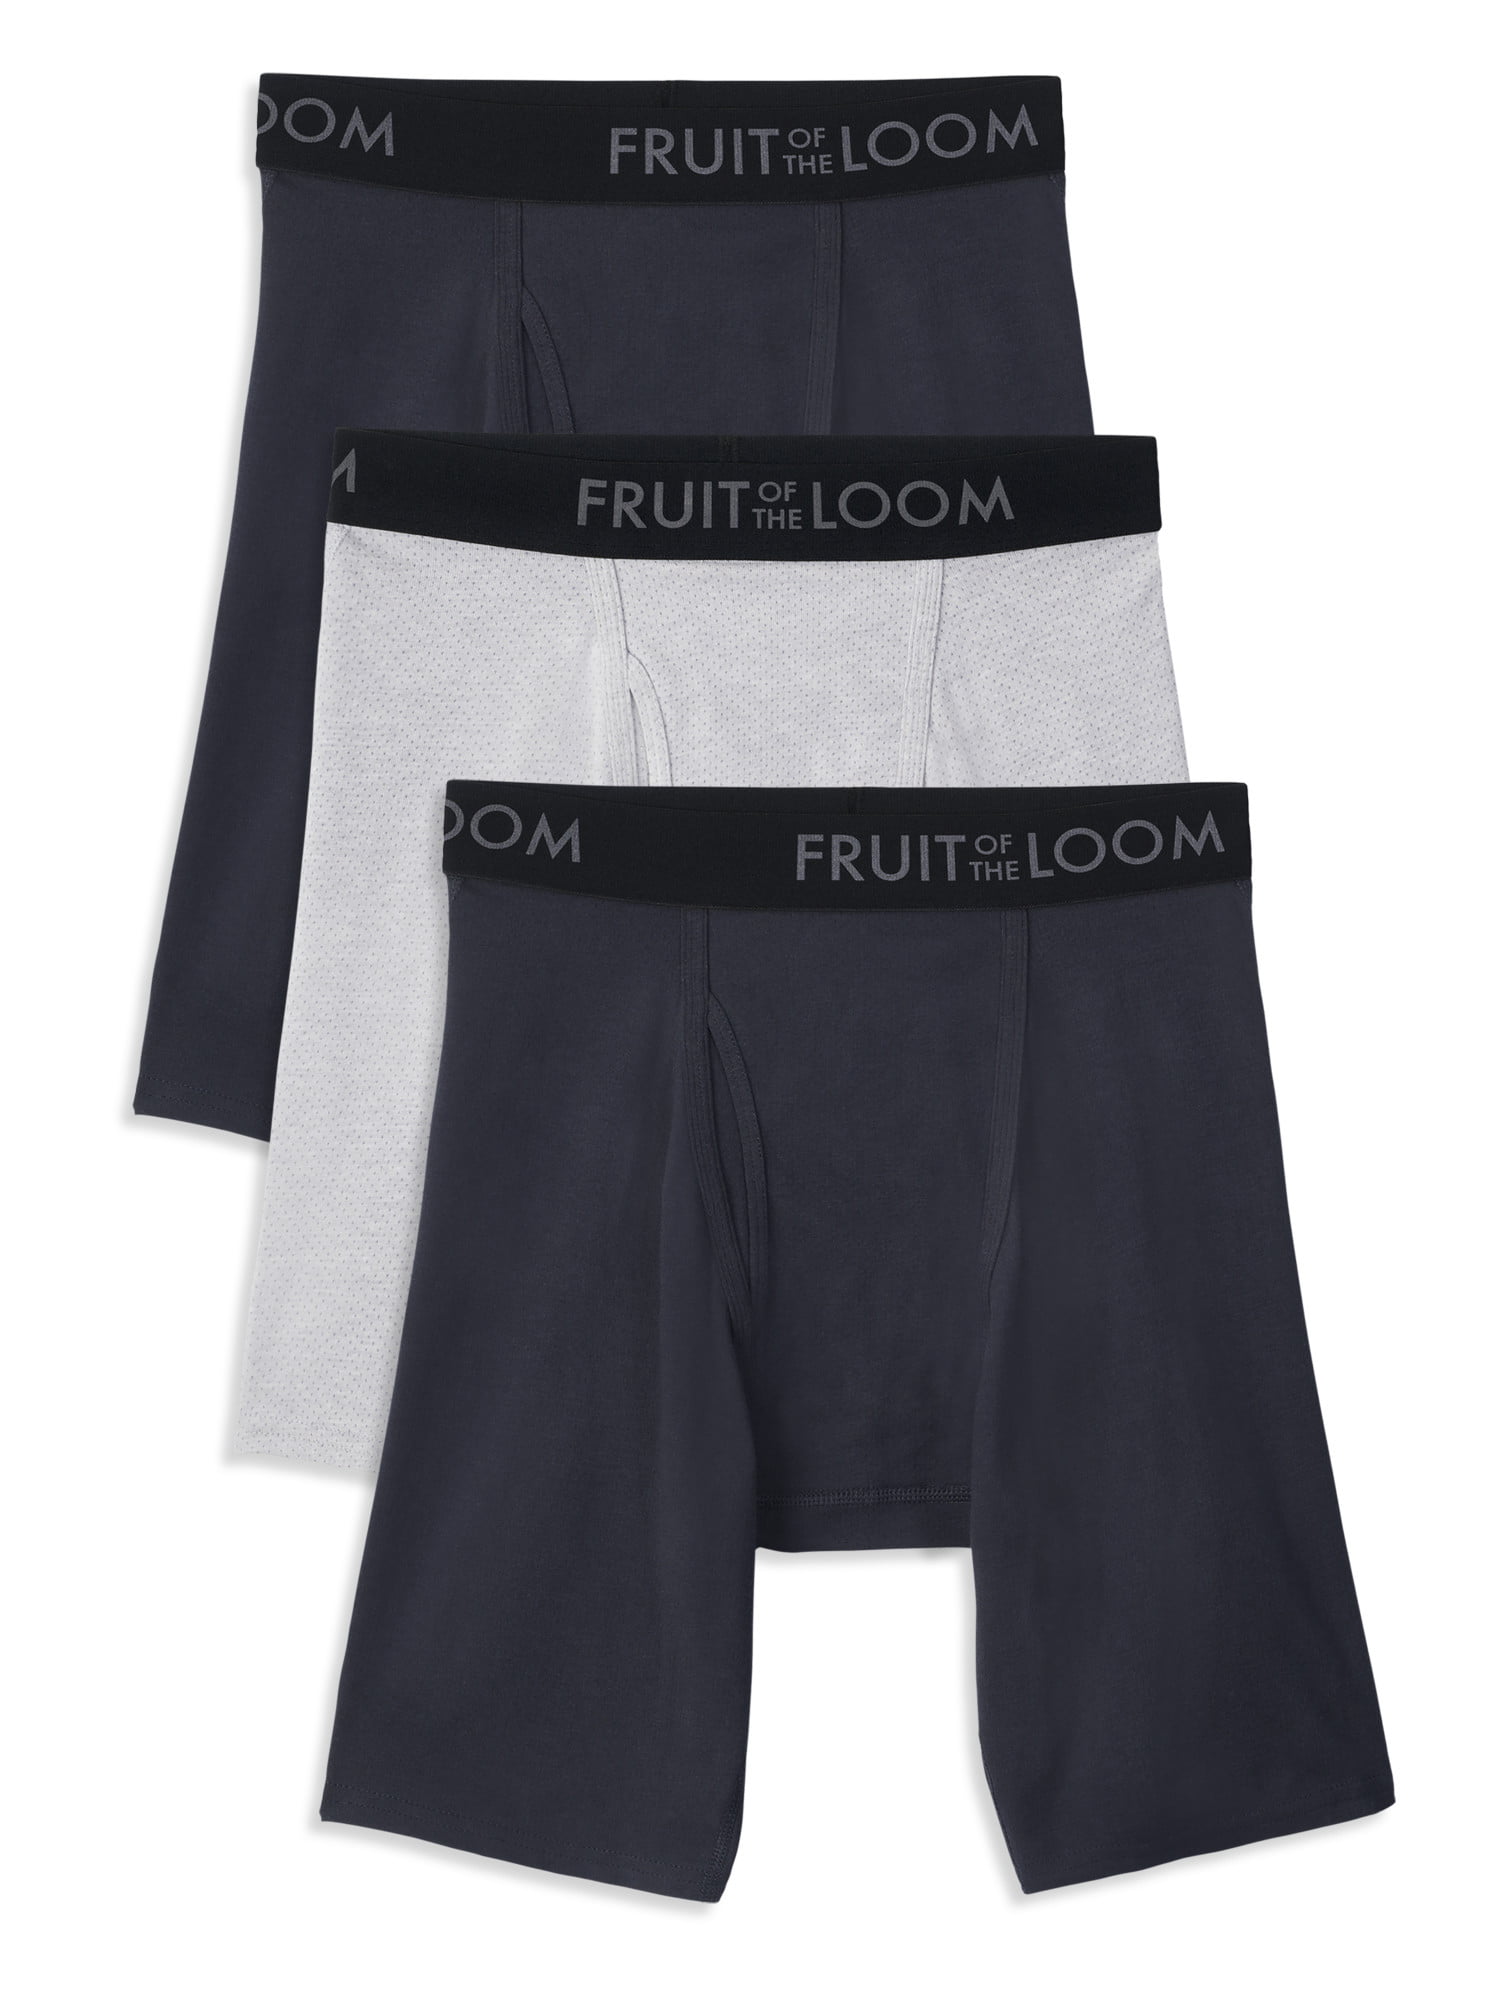 fruit of the loom boxers